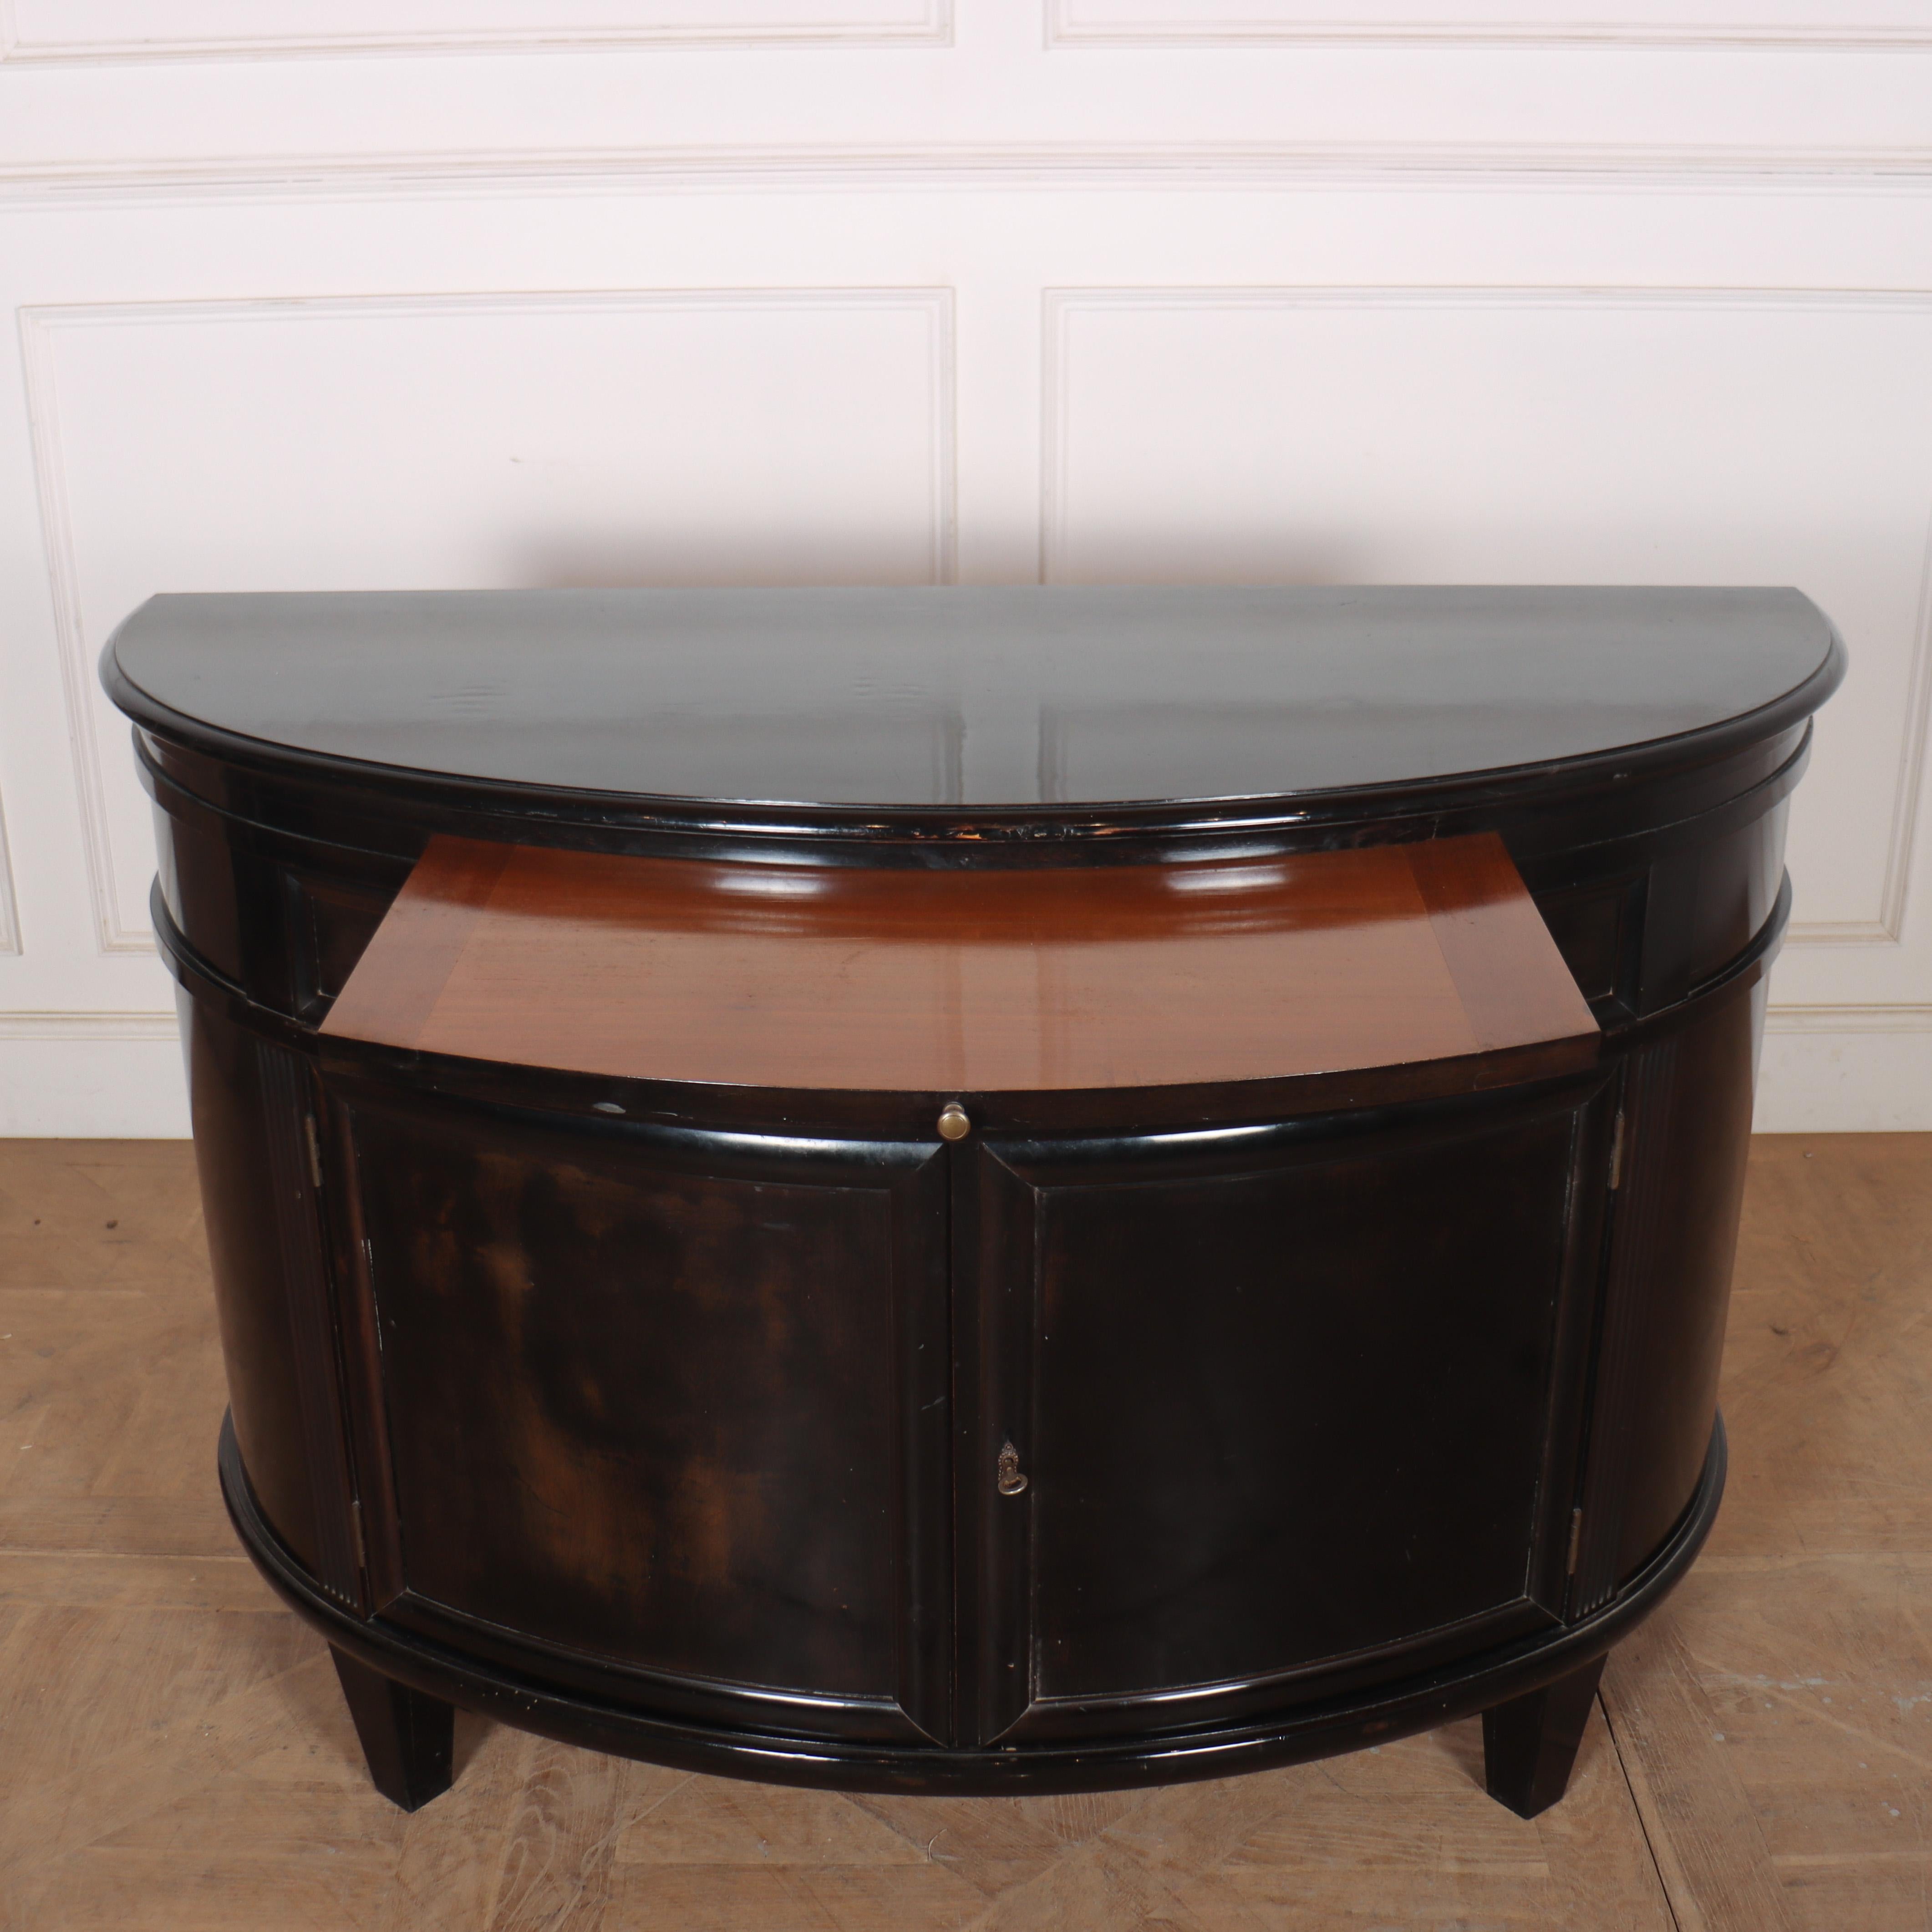 19th C French ebonised demi lune side cabinet with brushing slide. 1880.

Reference: 8263

Dimensions
53.5 inches (136 cms) Wide
22 inches (56 cms) Deep
36.5 inches (93 cms) High